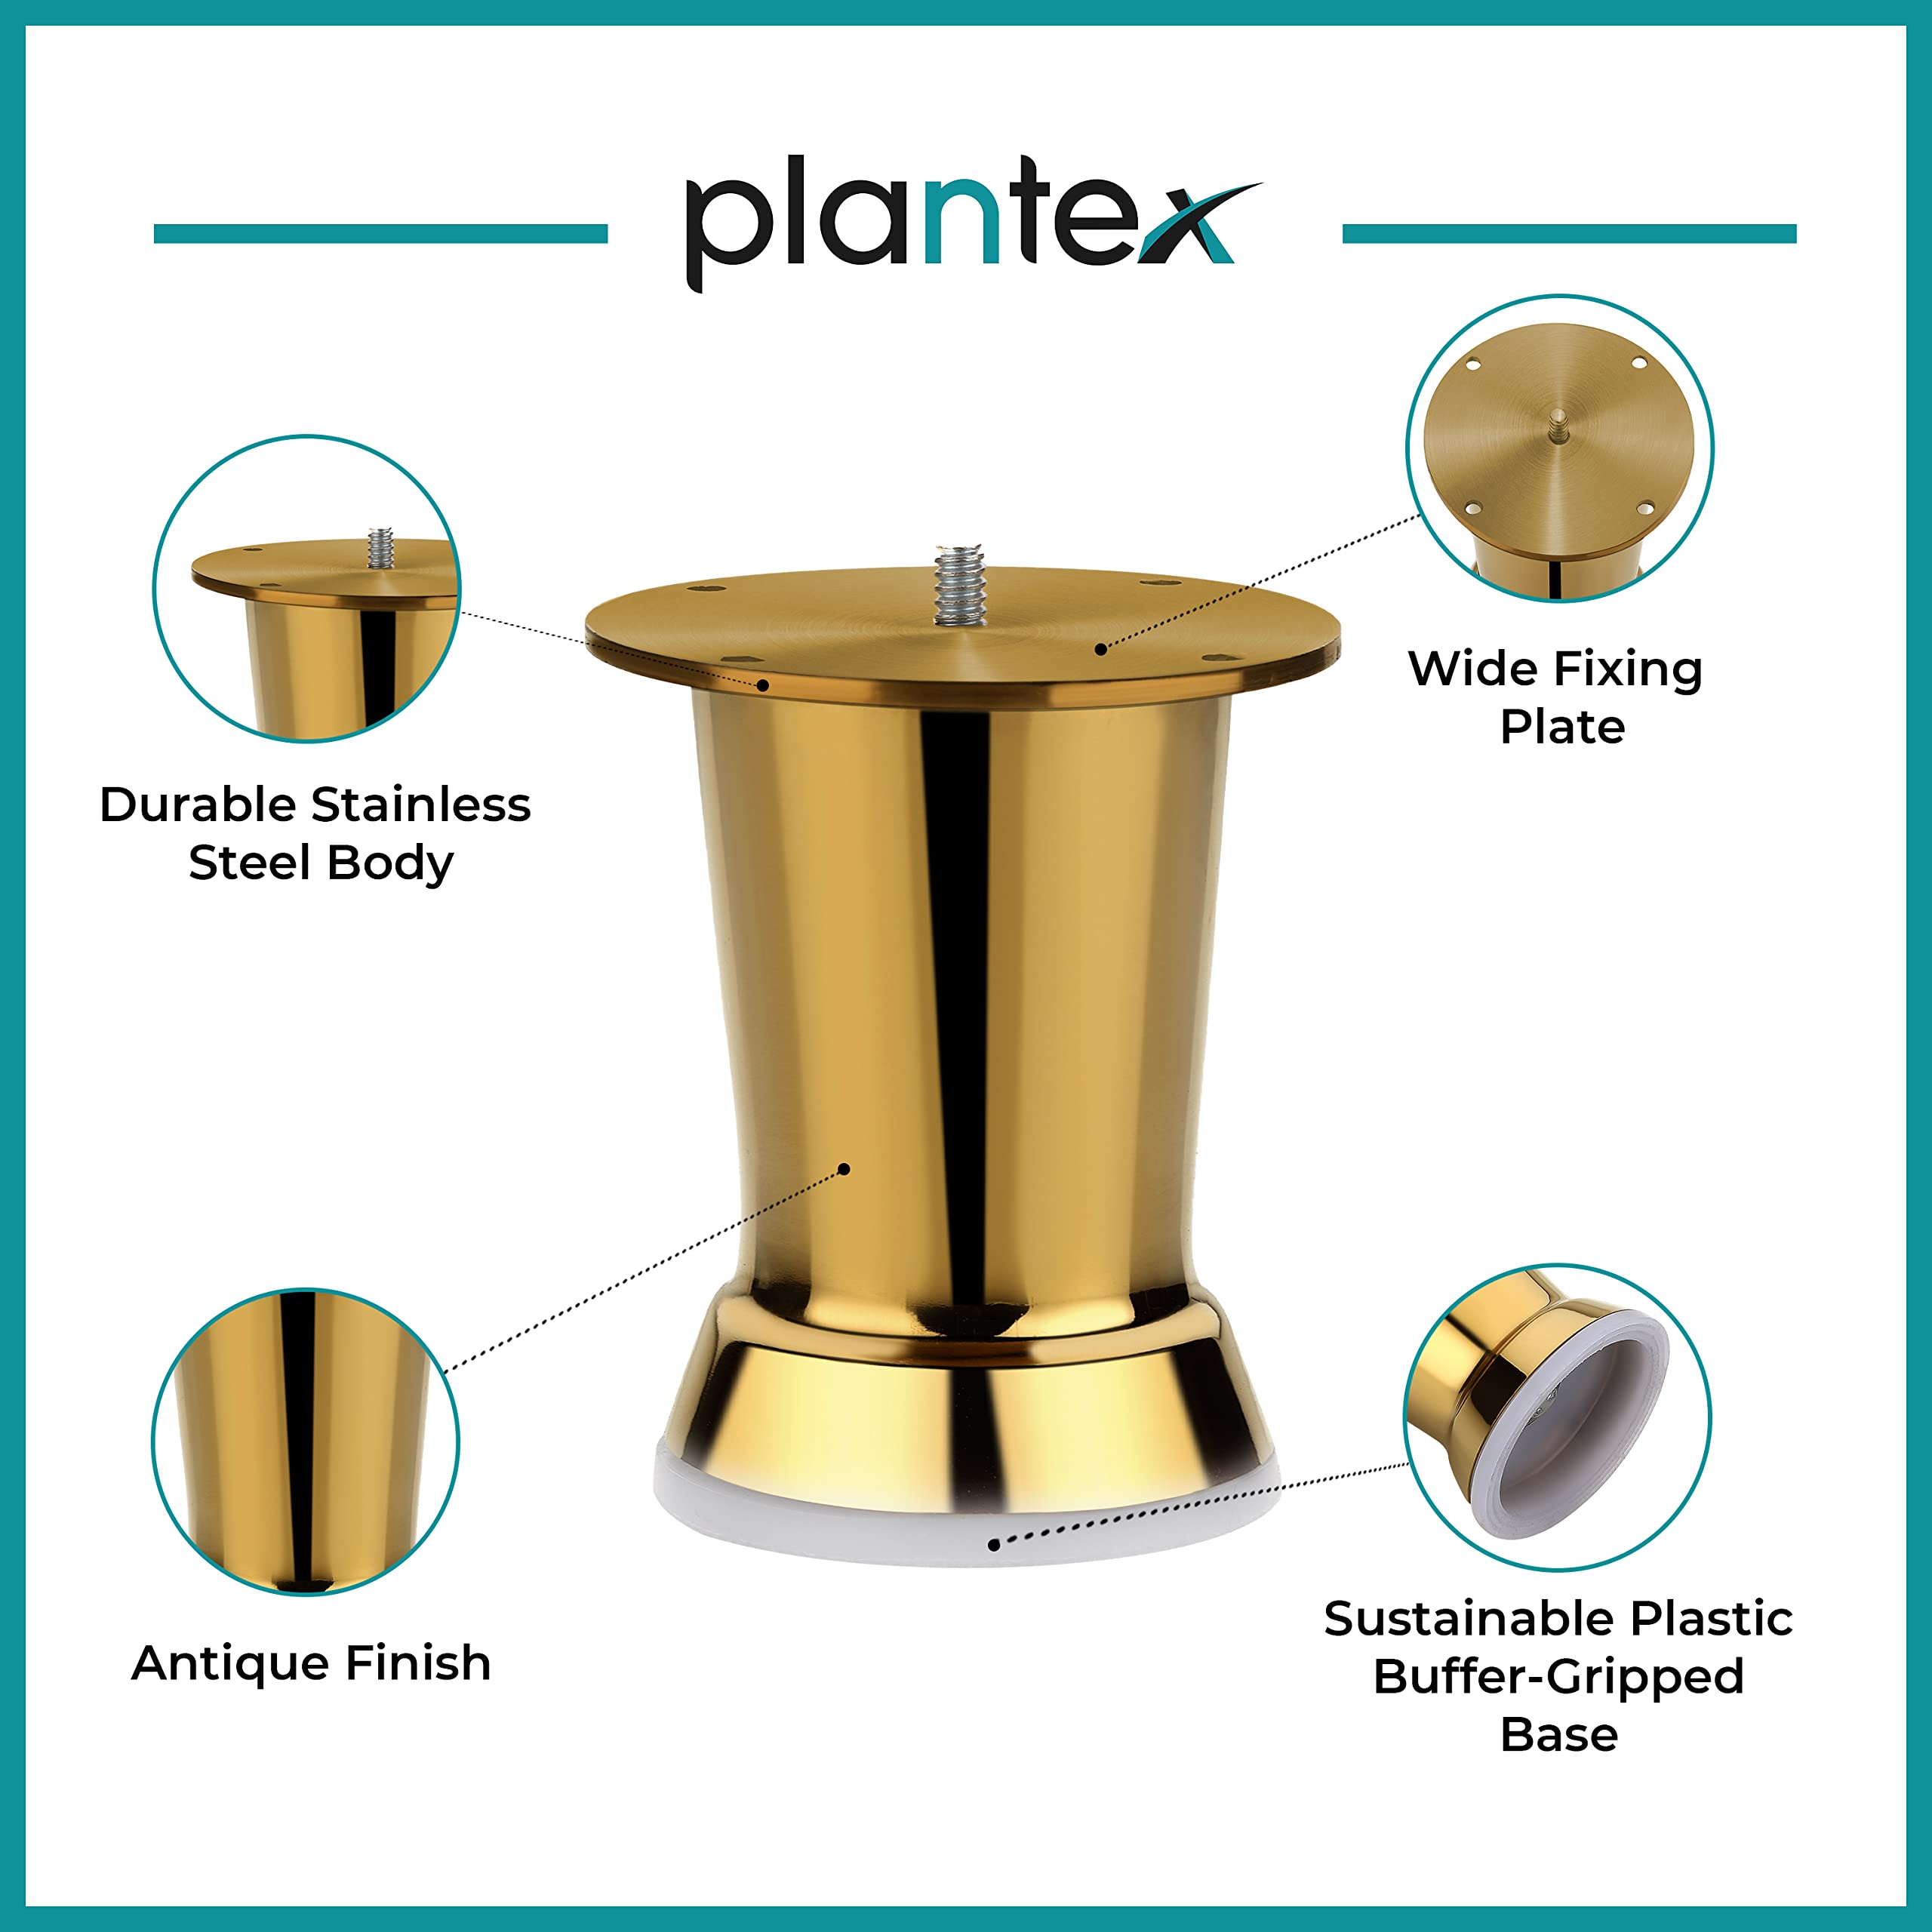 Plantex Heavy Duty Stainless Steel 4 inch Sofa Leg/Bed Furniture Leg Pair for Home Furnitures (DTS-51, Gold) – Pcs - 8